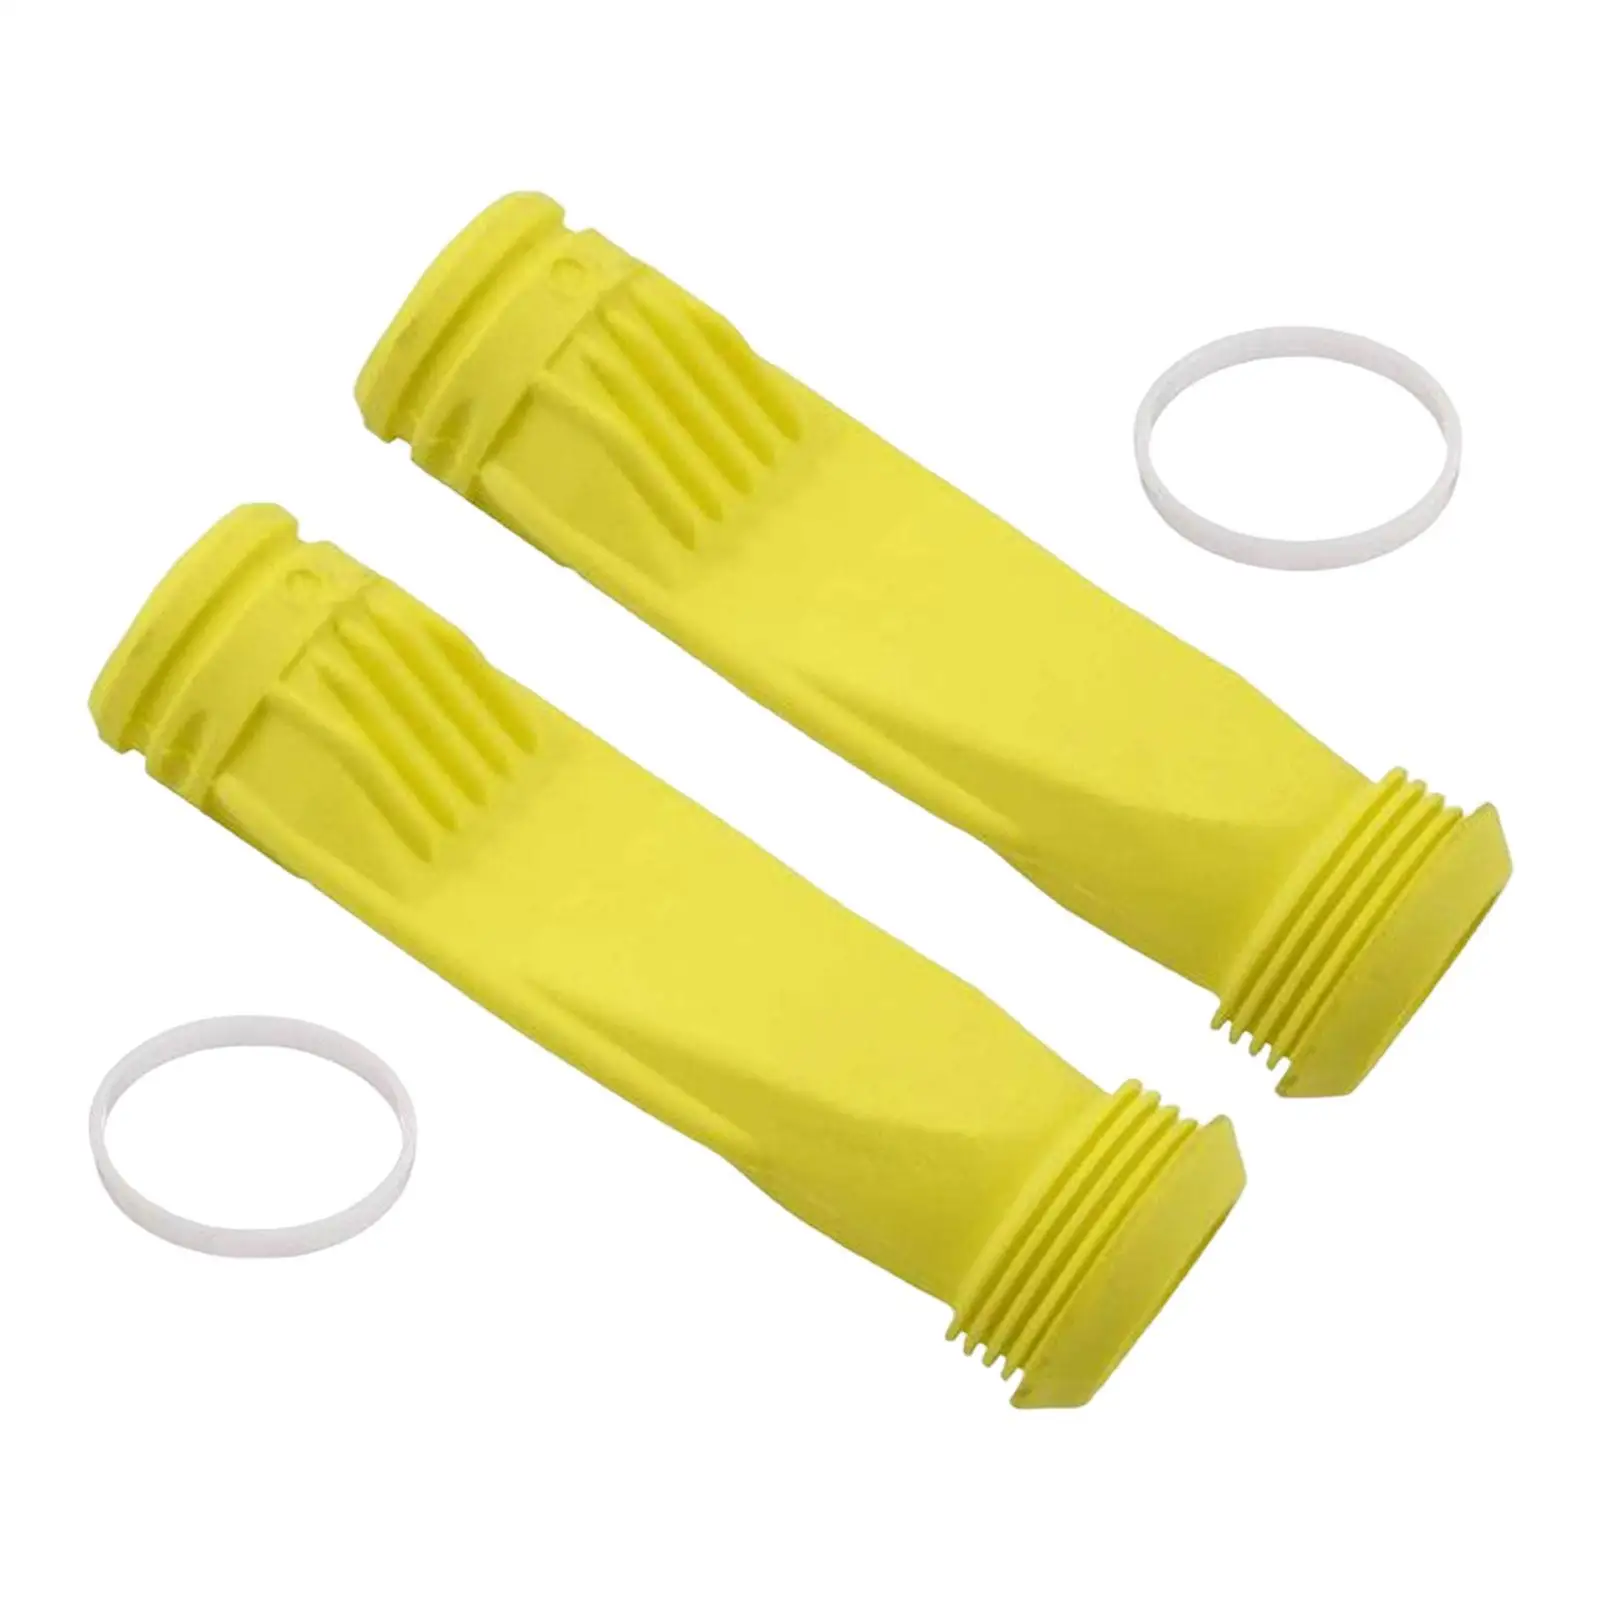 2x Pool Cleaner Diaphragm Strong Replacement Accessory Durable Professional Convenient Installation Heavy Duty Rubber W69698